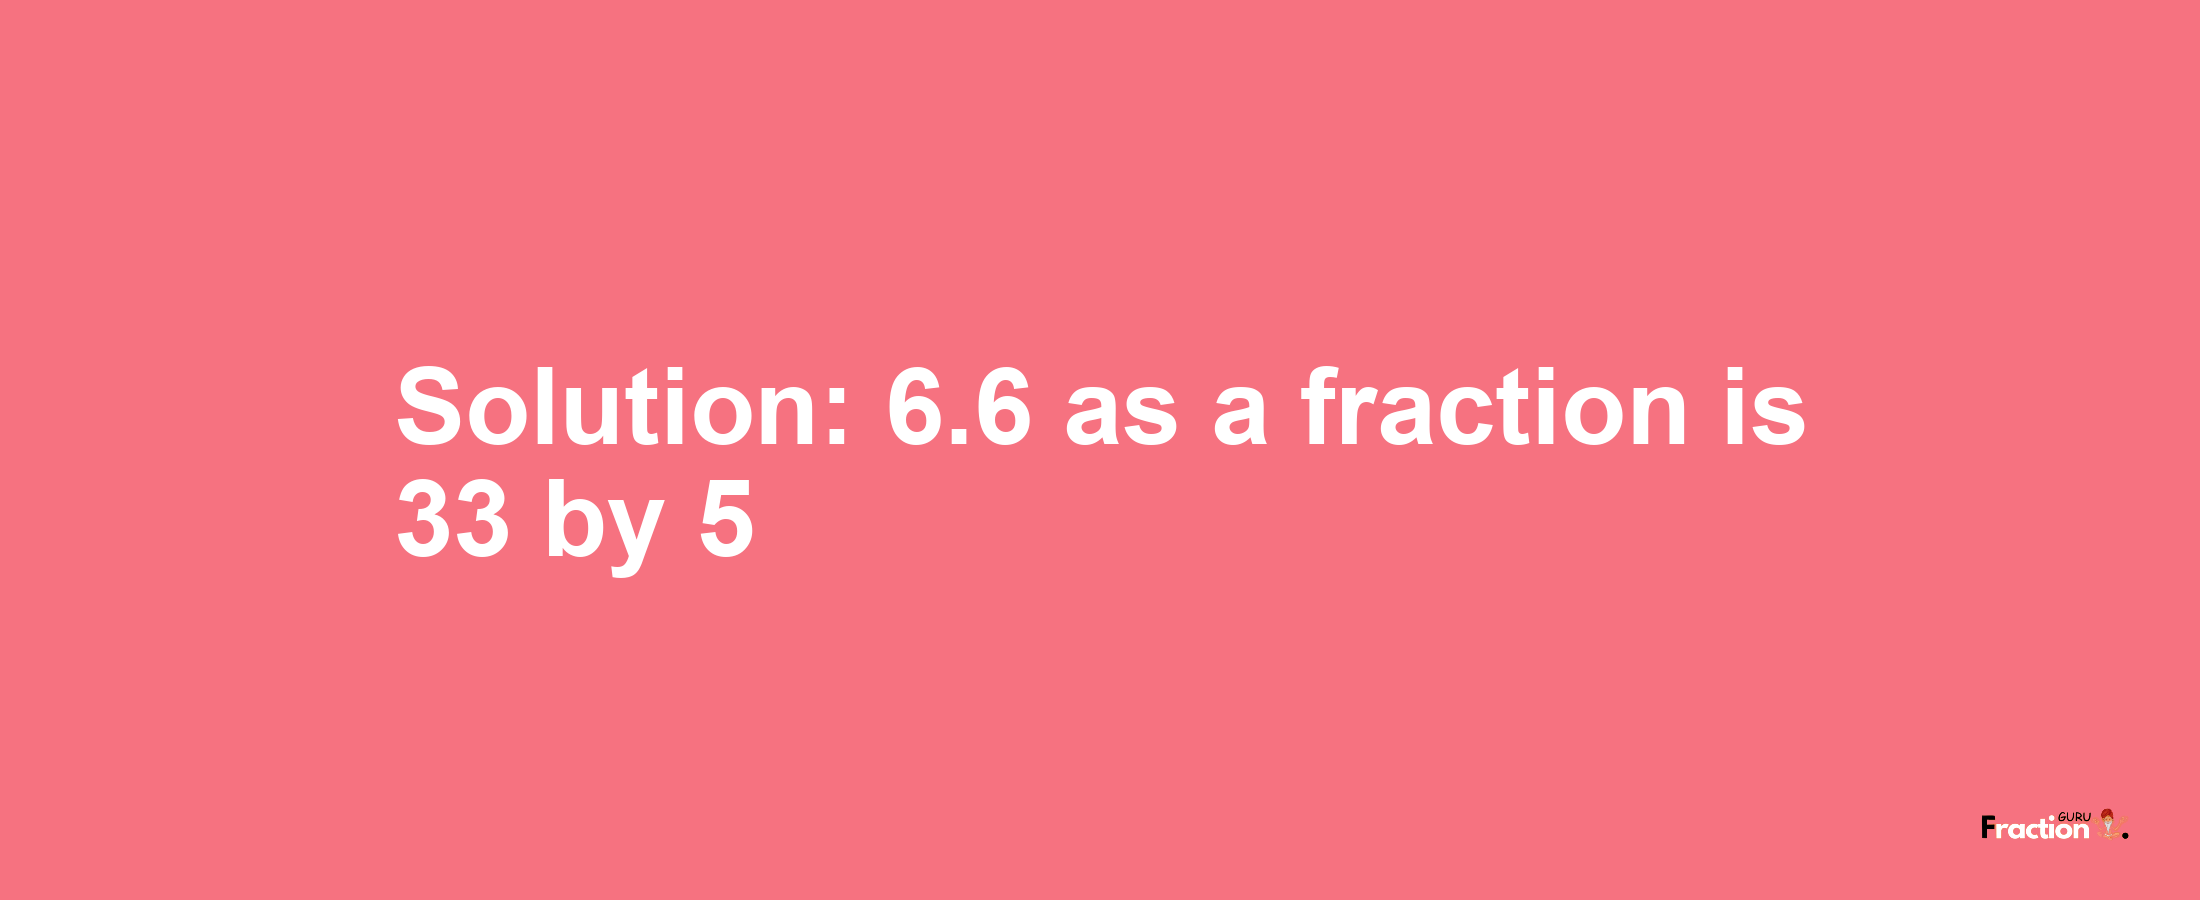 Solution:6.6 as a fraction is 33/5